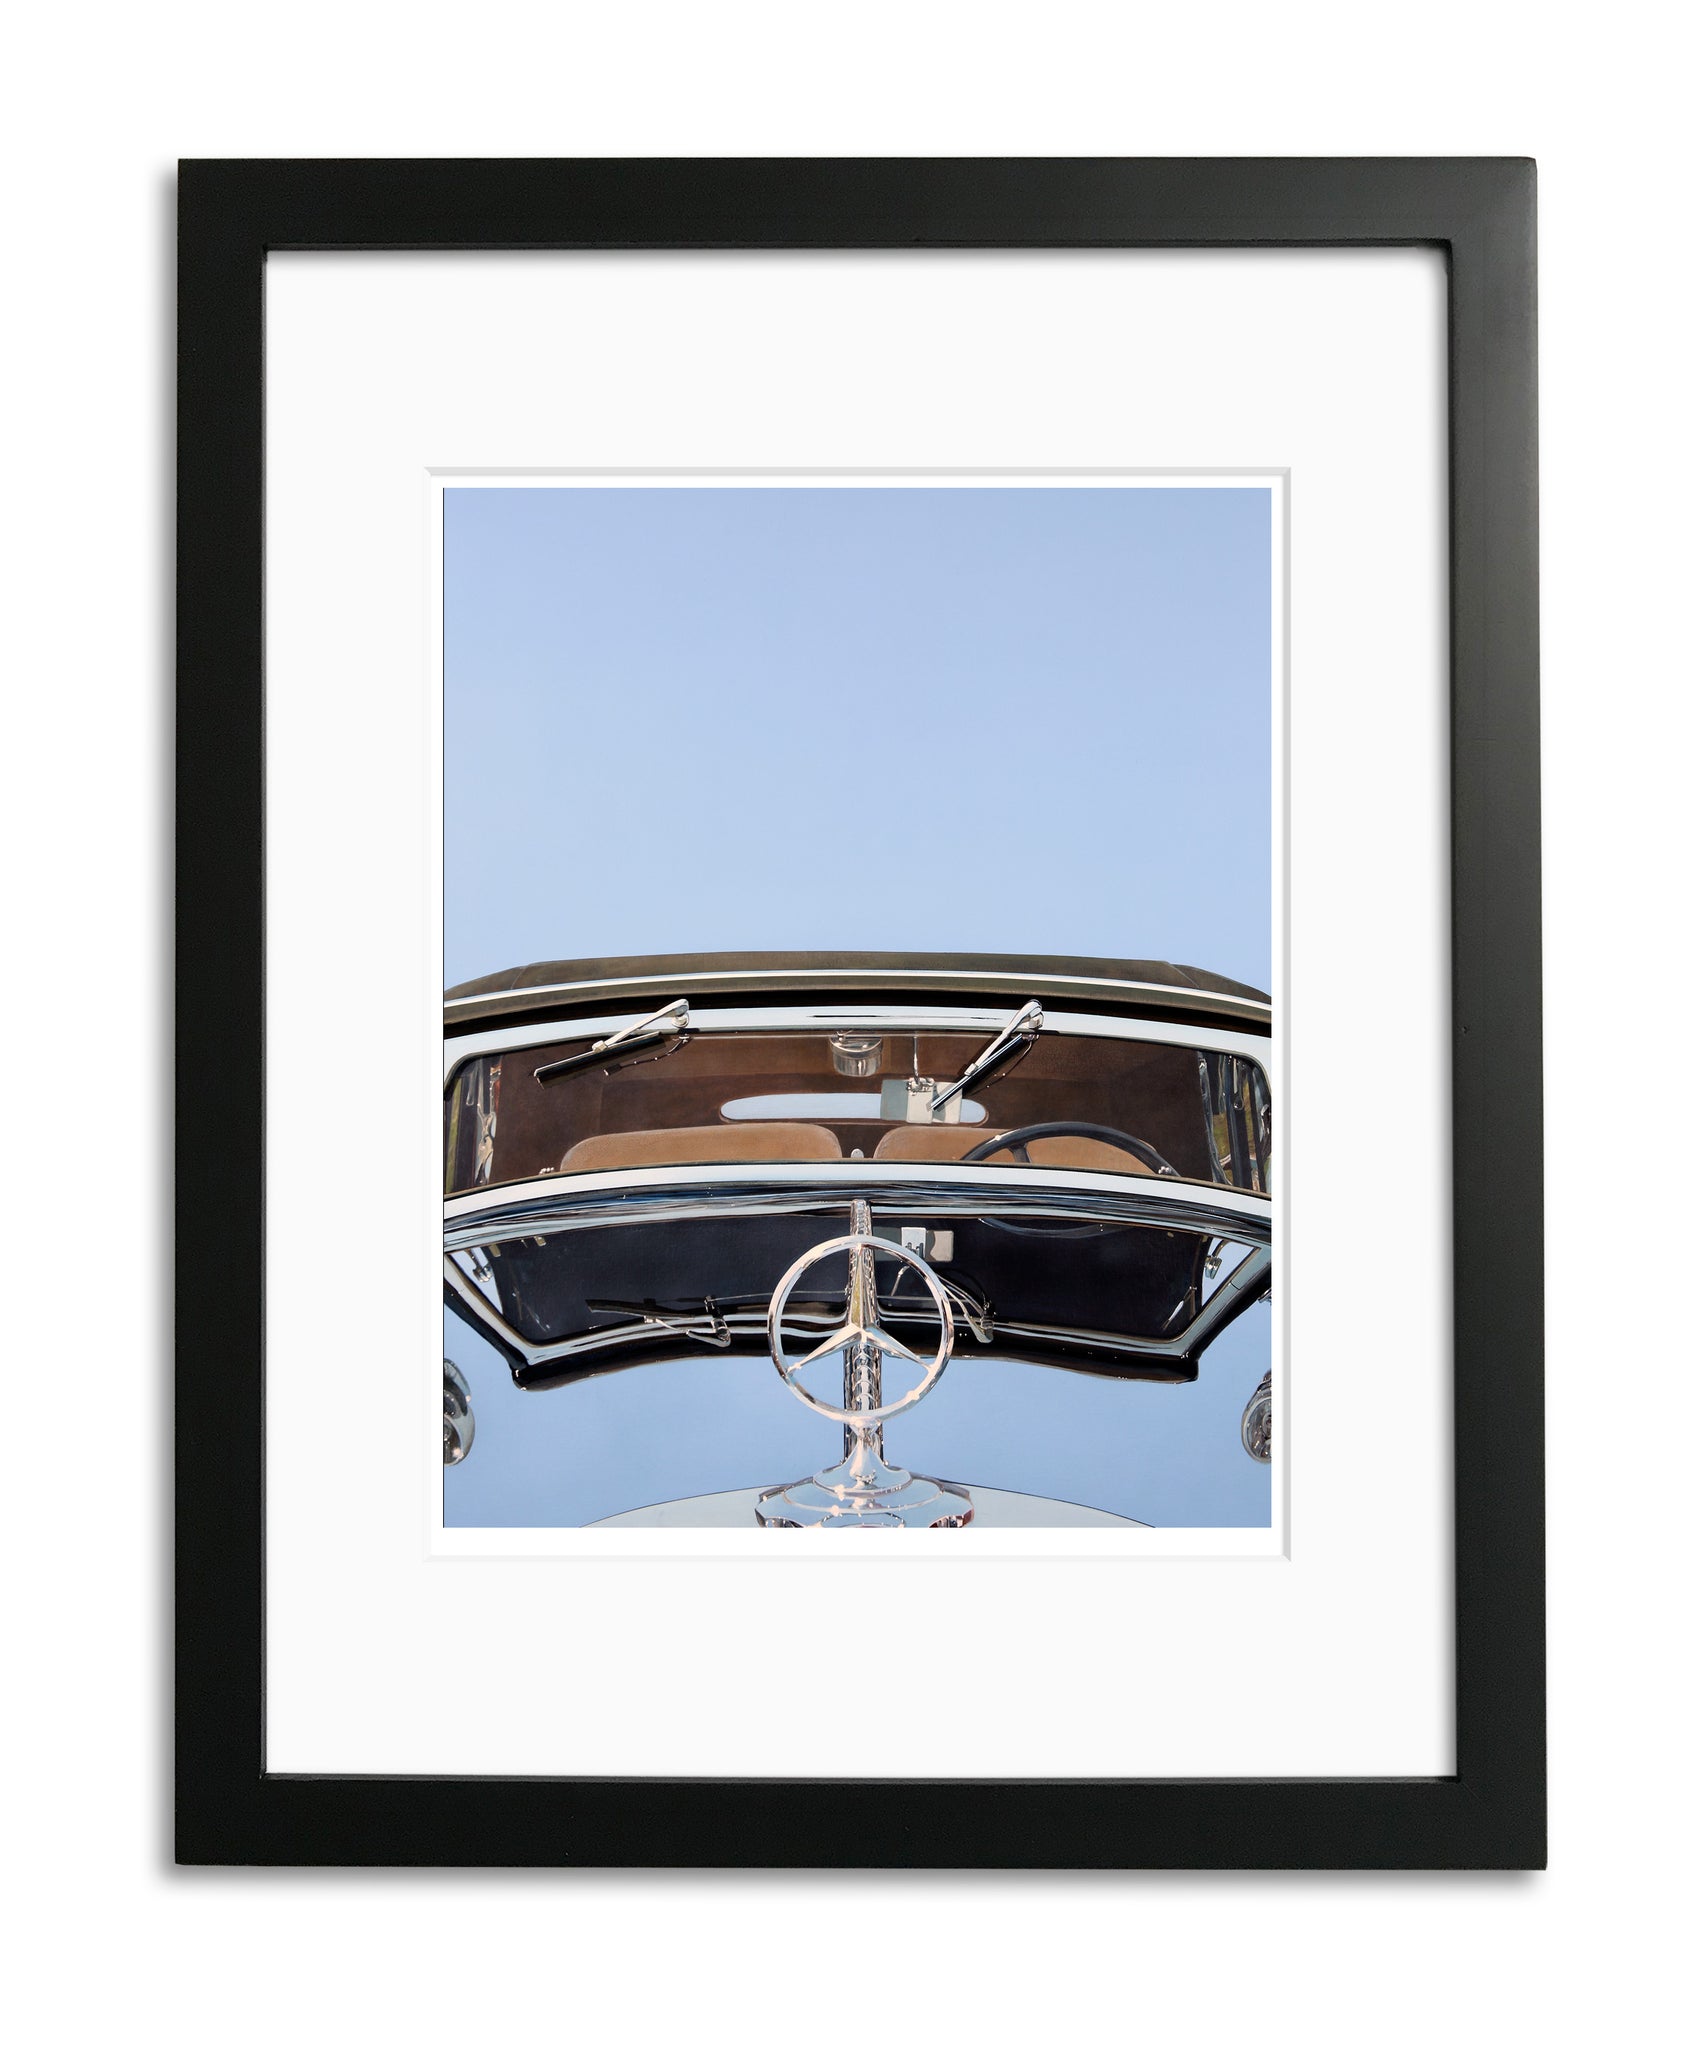 Blue Skies by Bruce Burr, Limited Edition Print